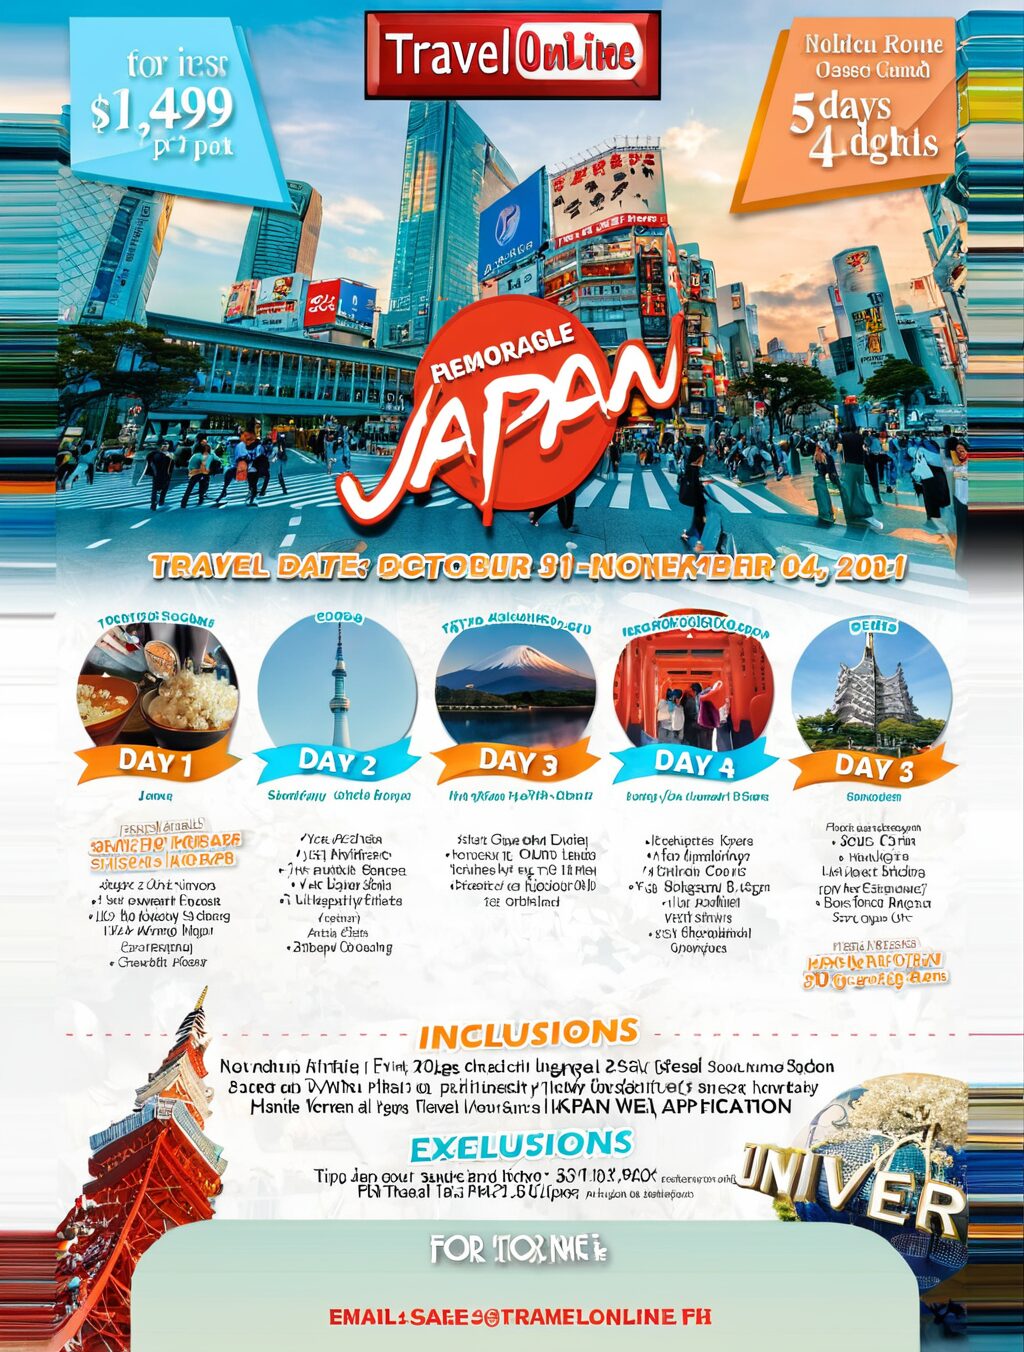 japan and south korea trip package